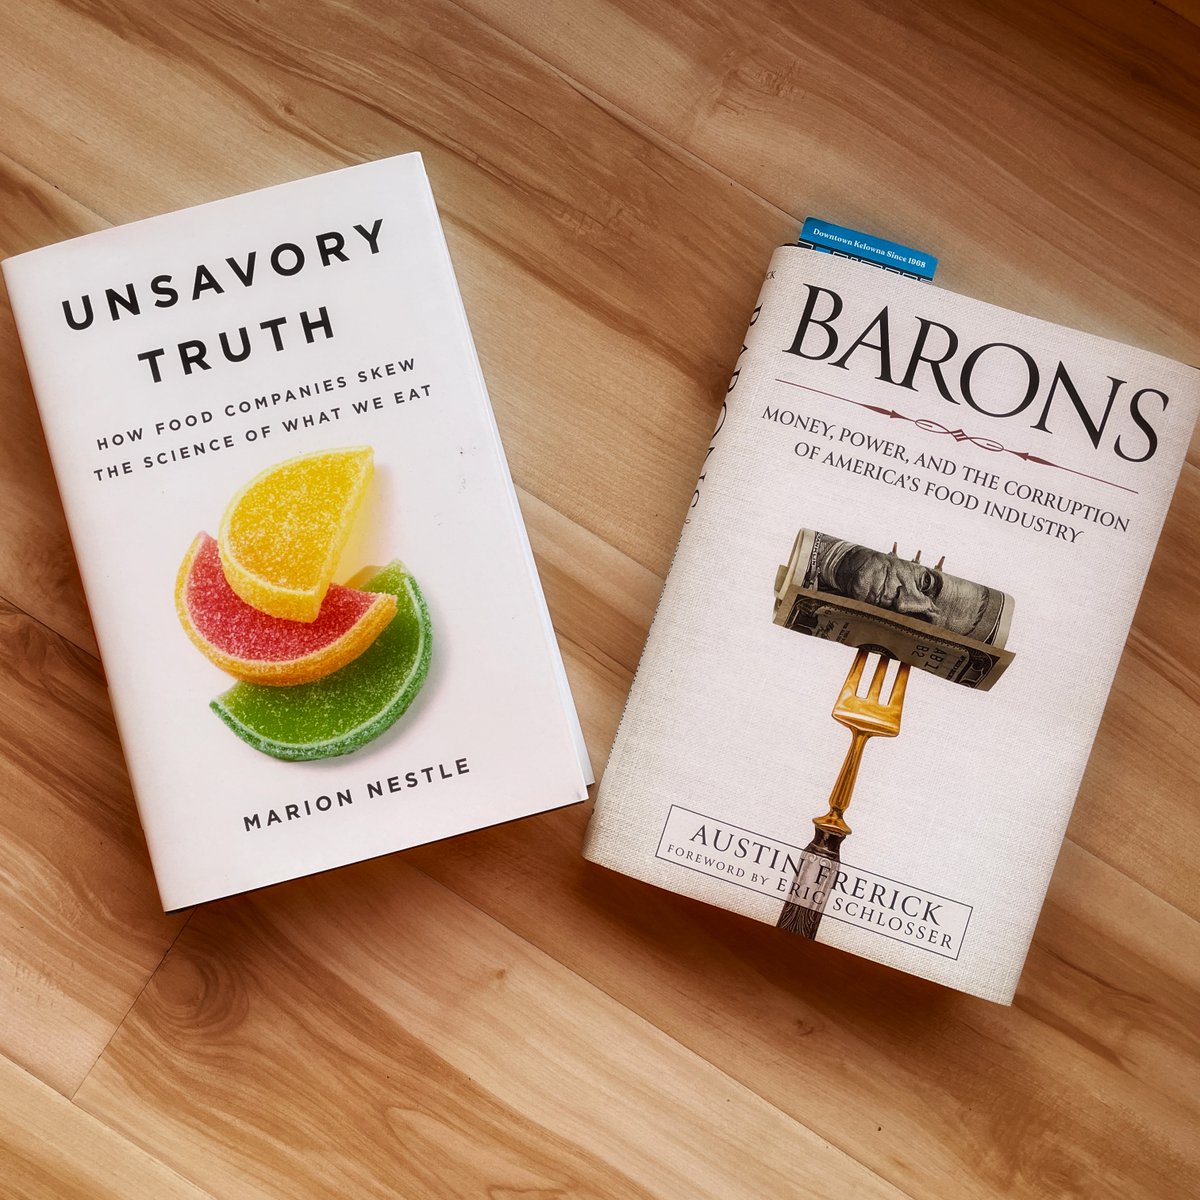 It's #IndependentBookstoreDay in 🇨🇦! I was so happy when I got the call from @mosaic_books that 2 special orders I had placed arrived just in time for me to celebrate. 'Barons,' by @AustinFrerick & 'Unsavory Truth' by @marionnestle. I can't wait to dive into them! 🍴